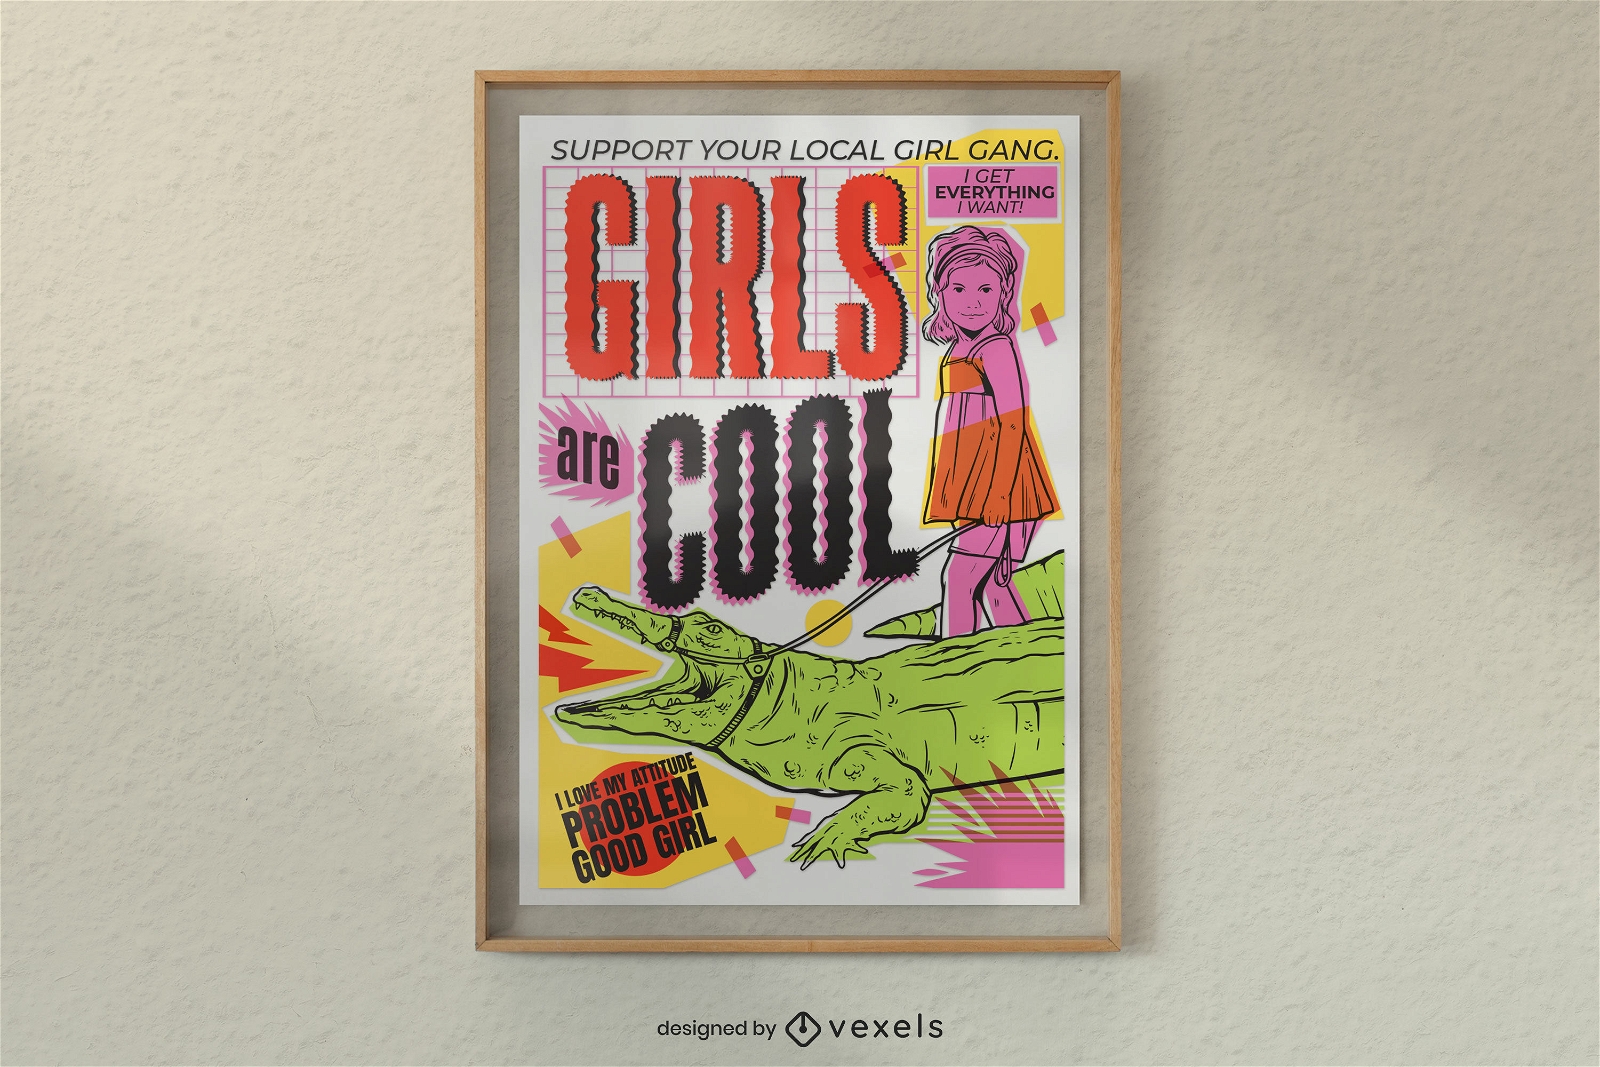 Girls are cool poster design